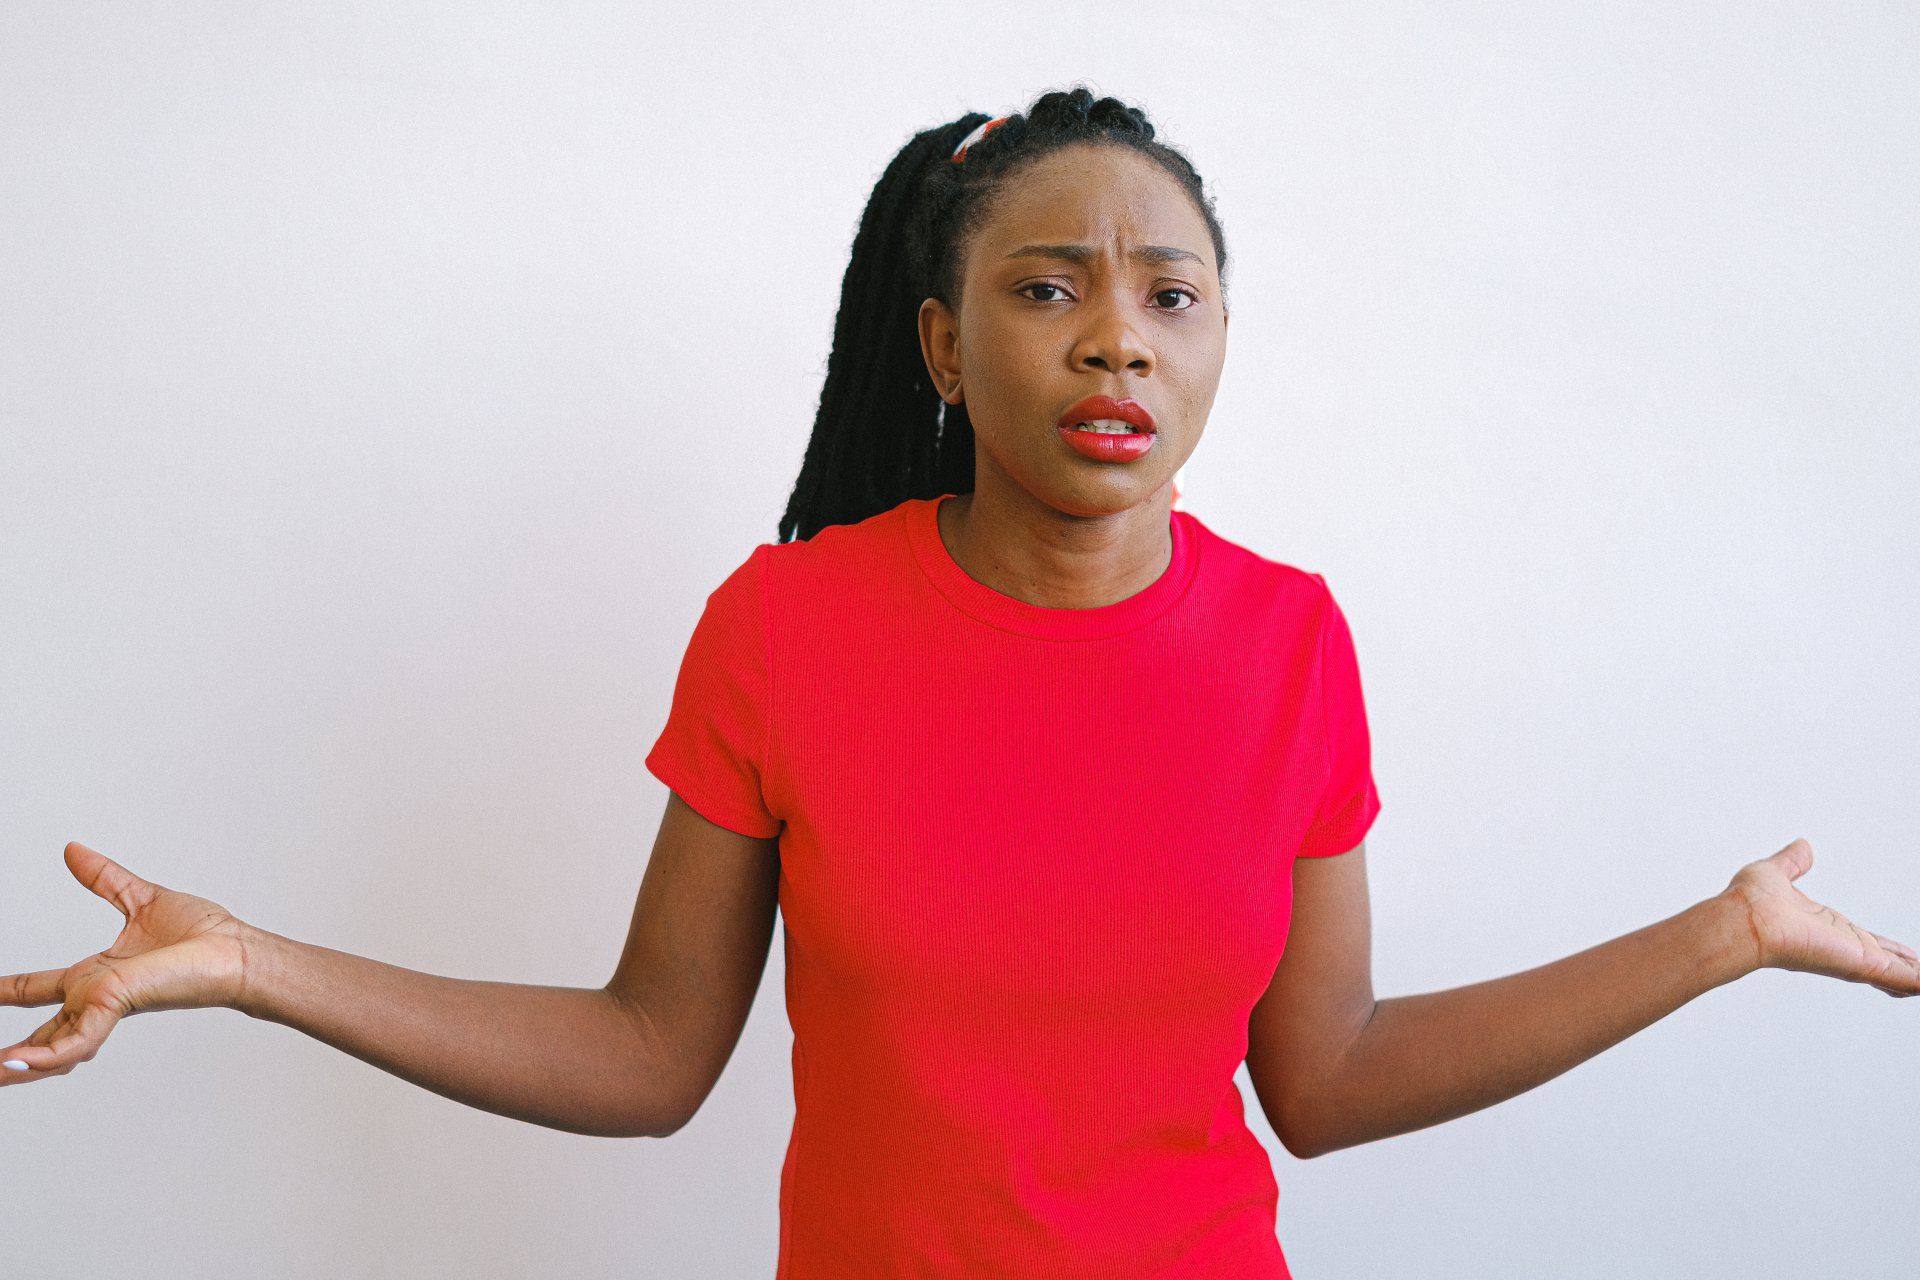 Image of lady wearing a red shirt